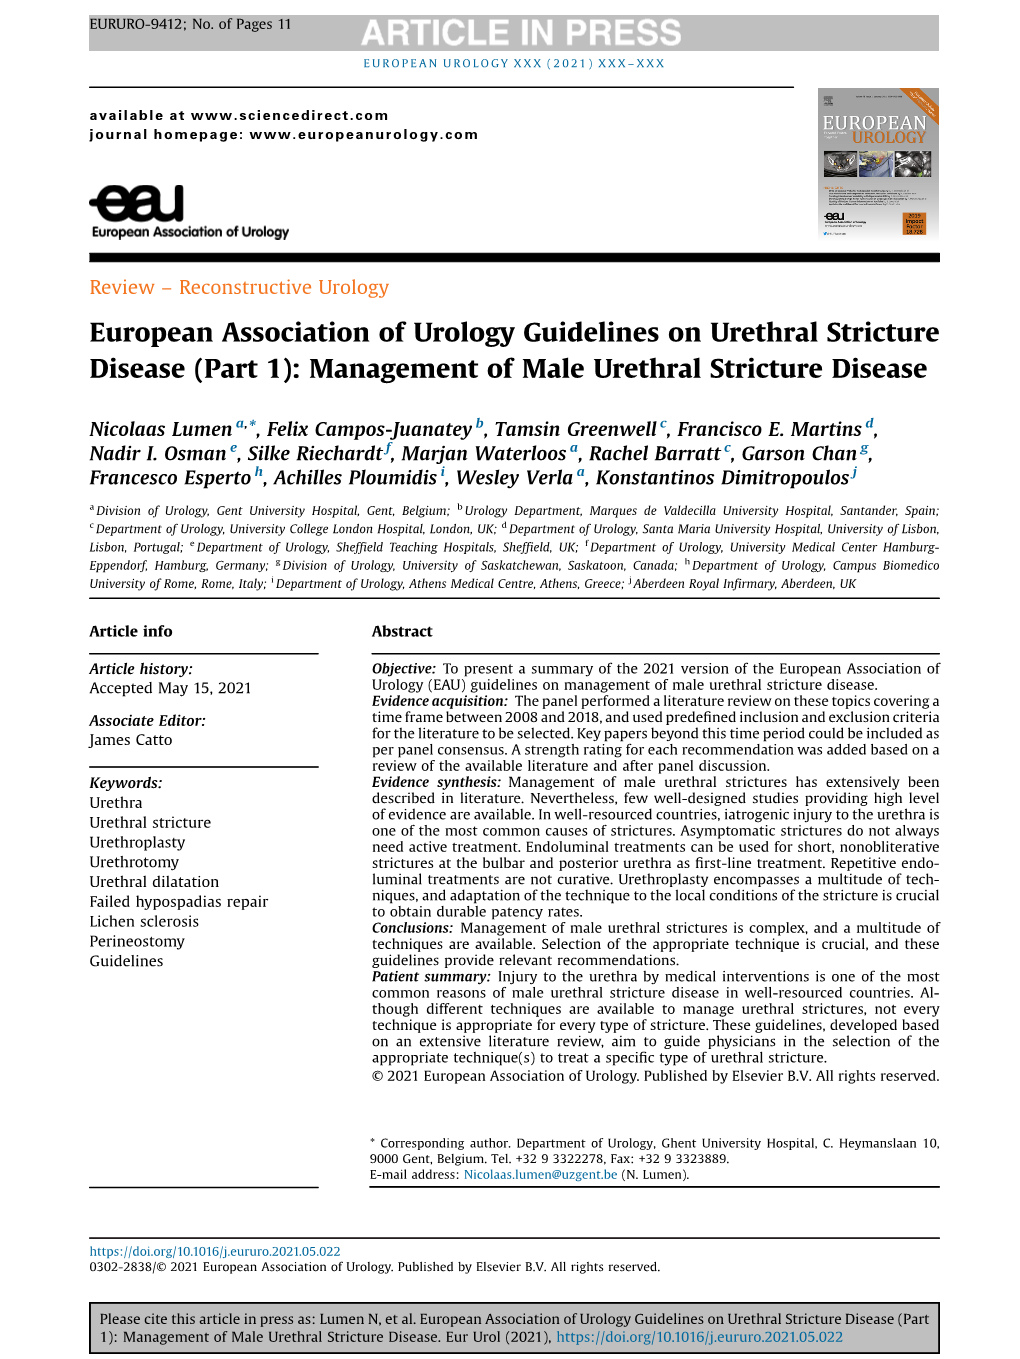 (Part 1): Management of Male Urethral Stricture Disease